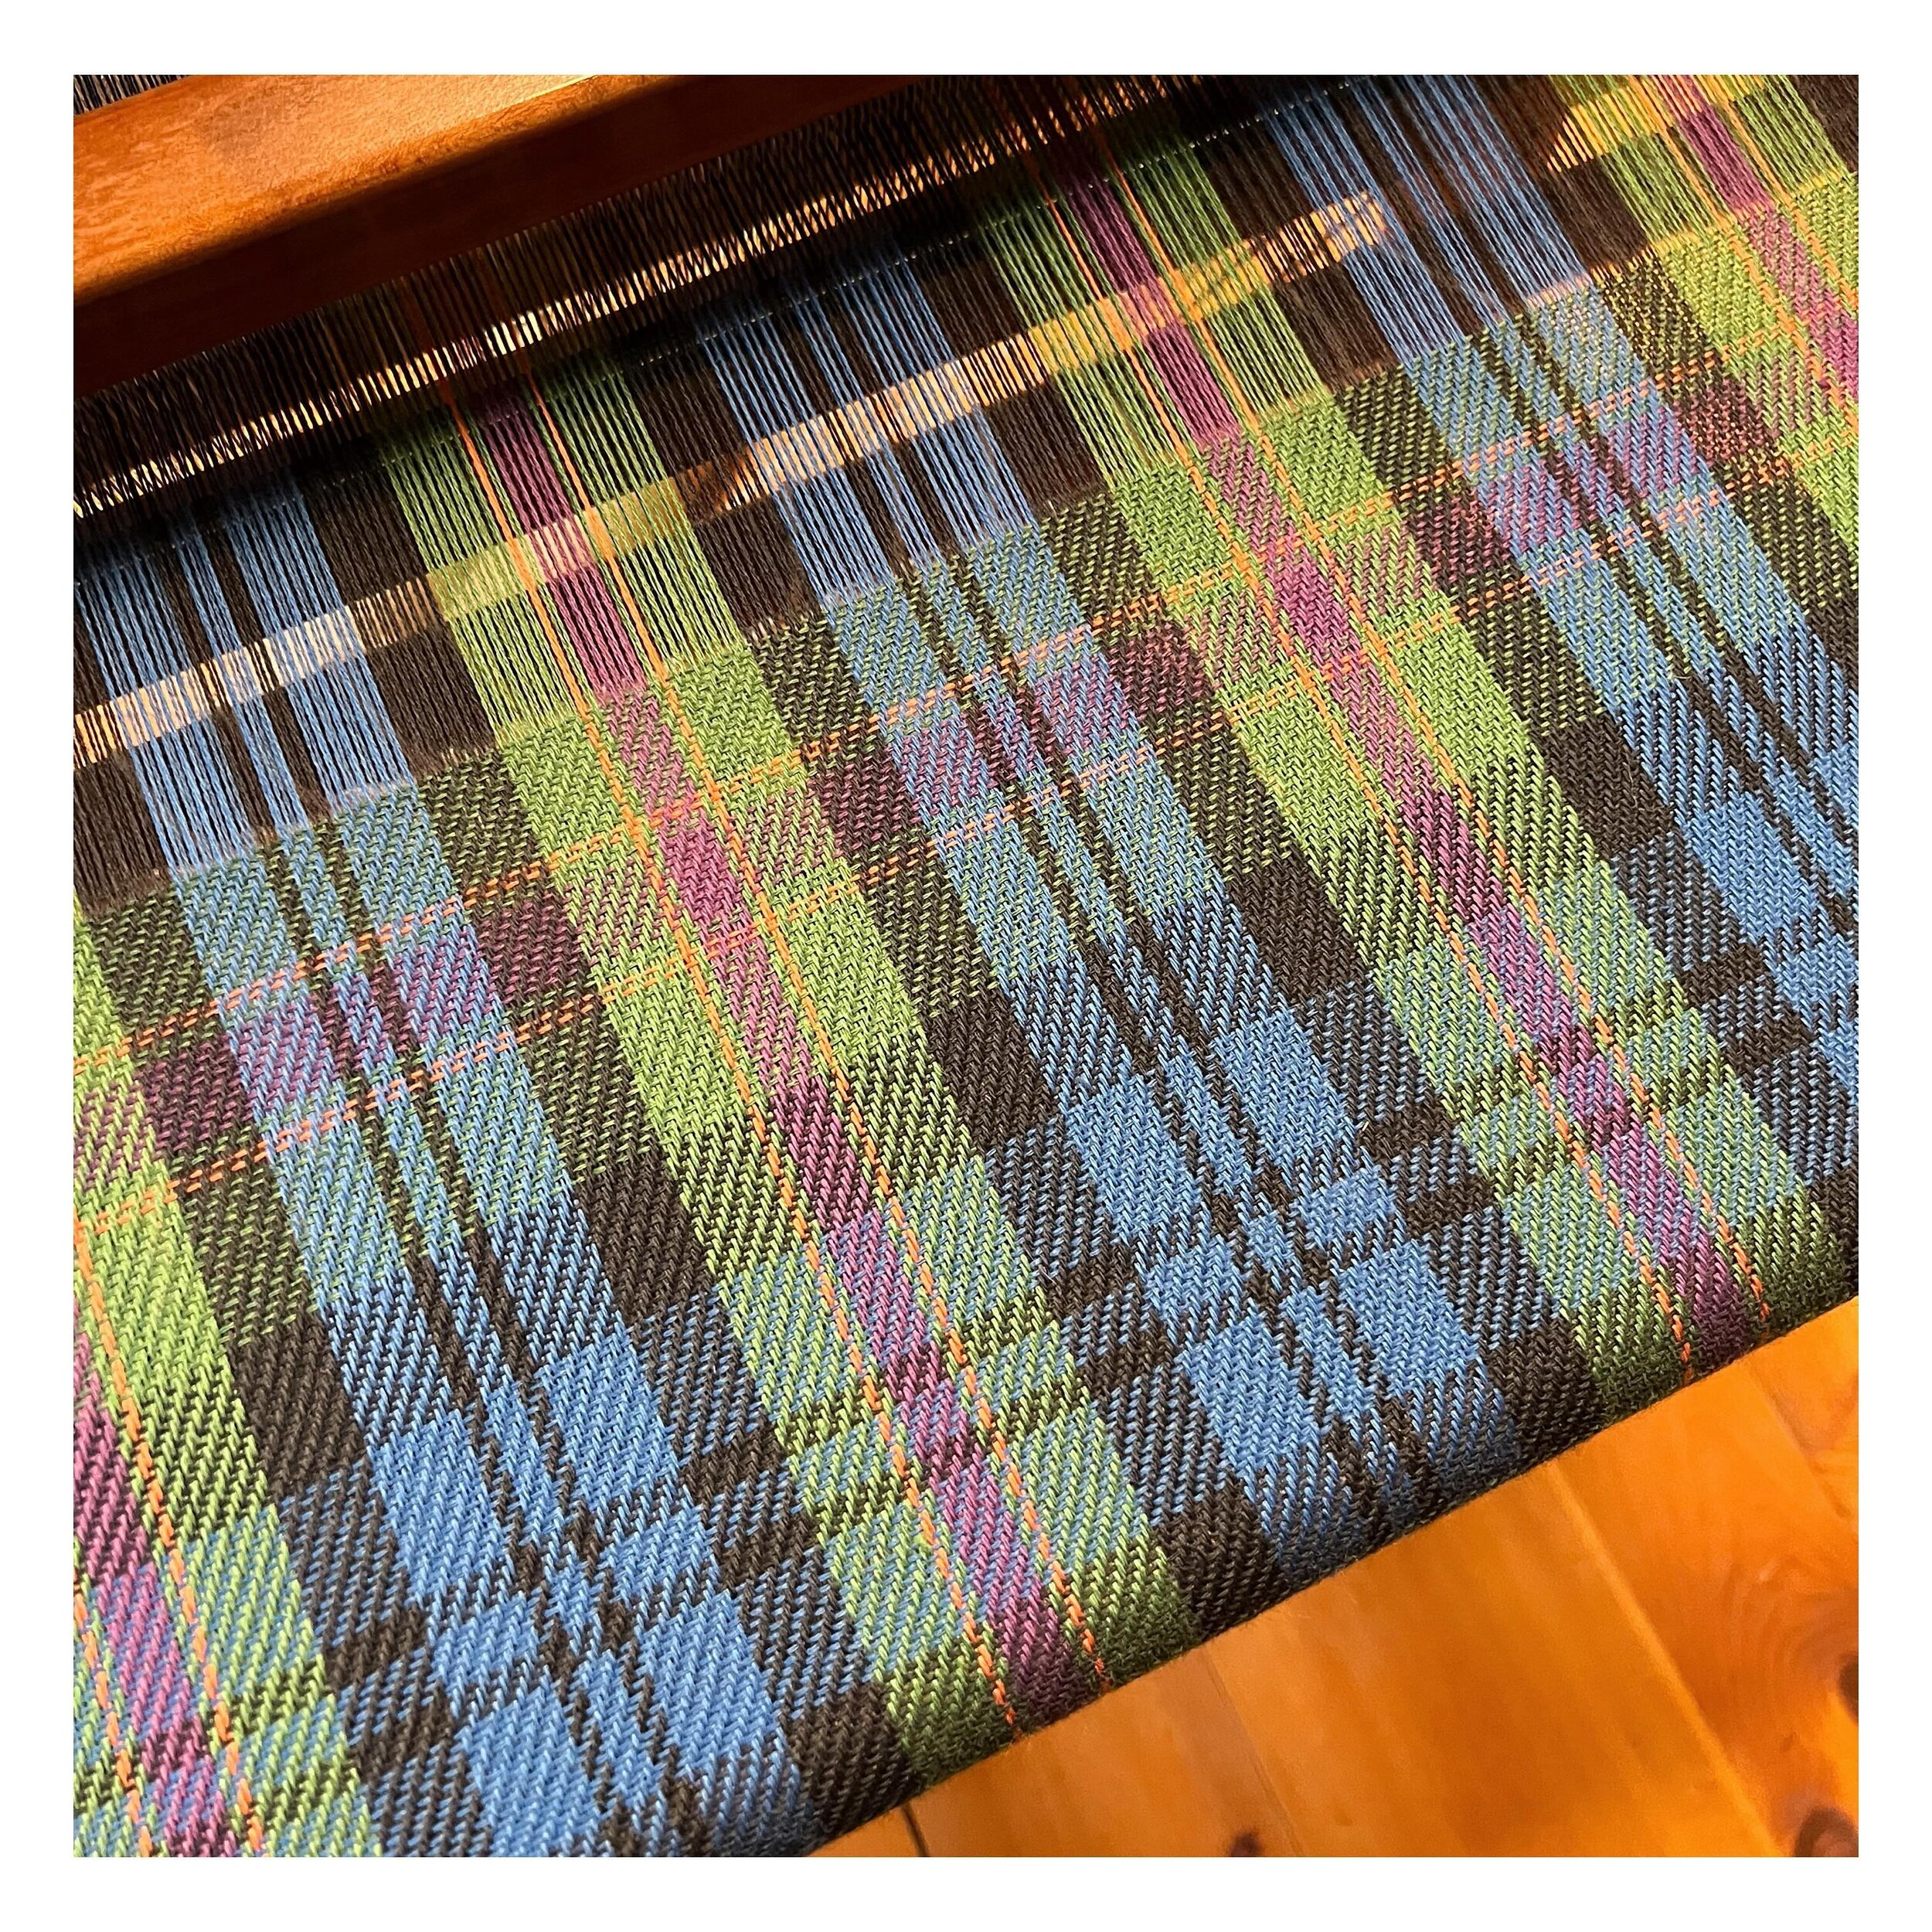 Ok!  We&rsquo;re all wound on and getting into the rhythm. The boxes will square up once off the loom and fulled. To finish this with plenty of time to sew into a kilt I will need to weave about 1.5 yards a week!  I think it&rsquo;s doable. 
.
.
.
.
